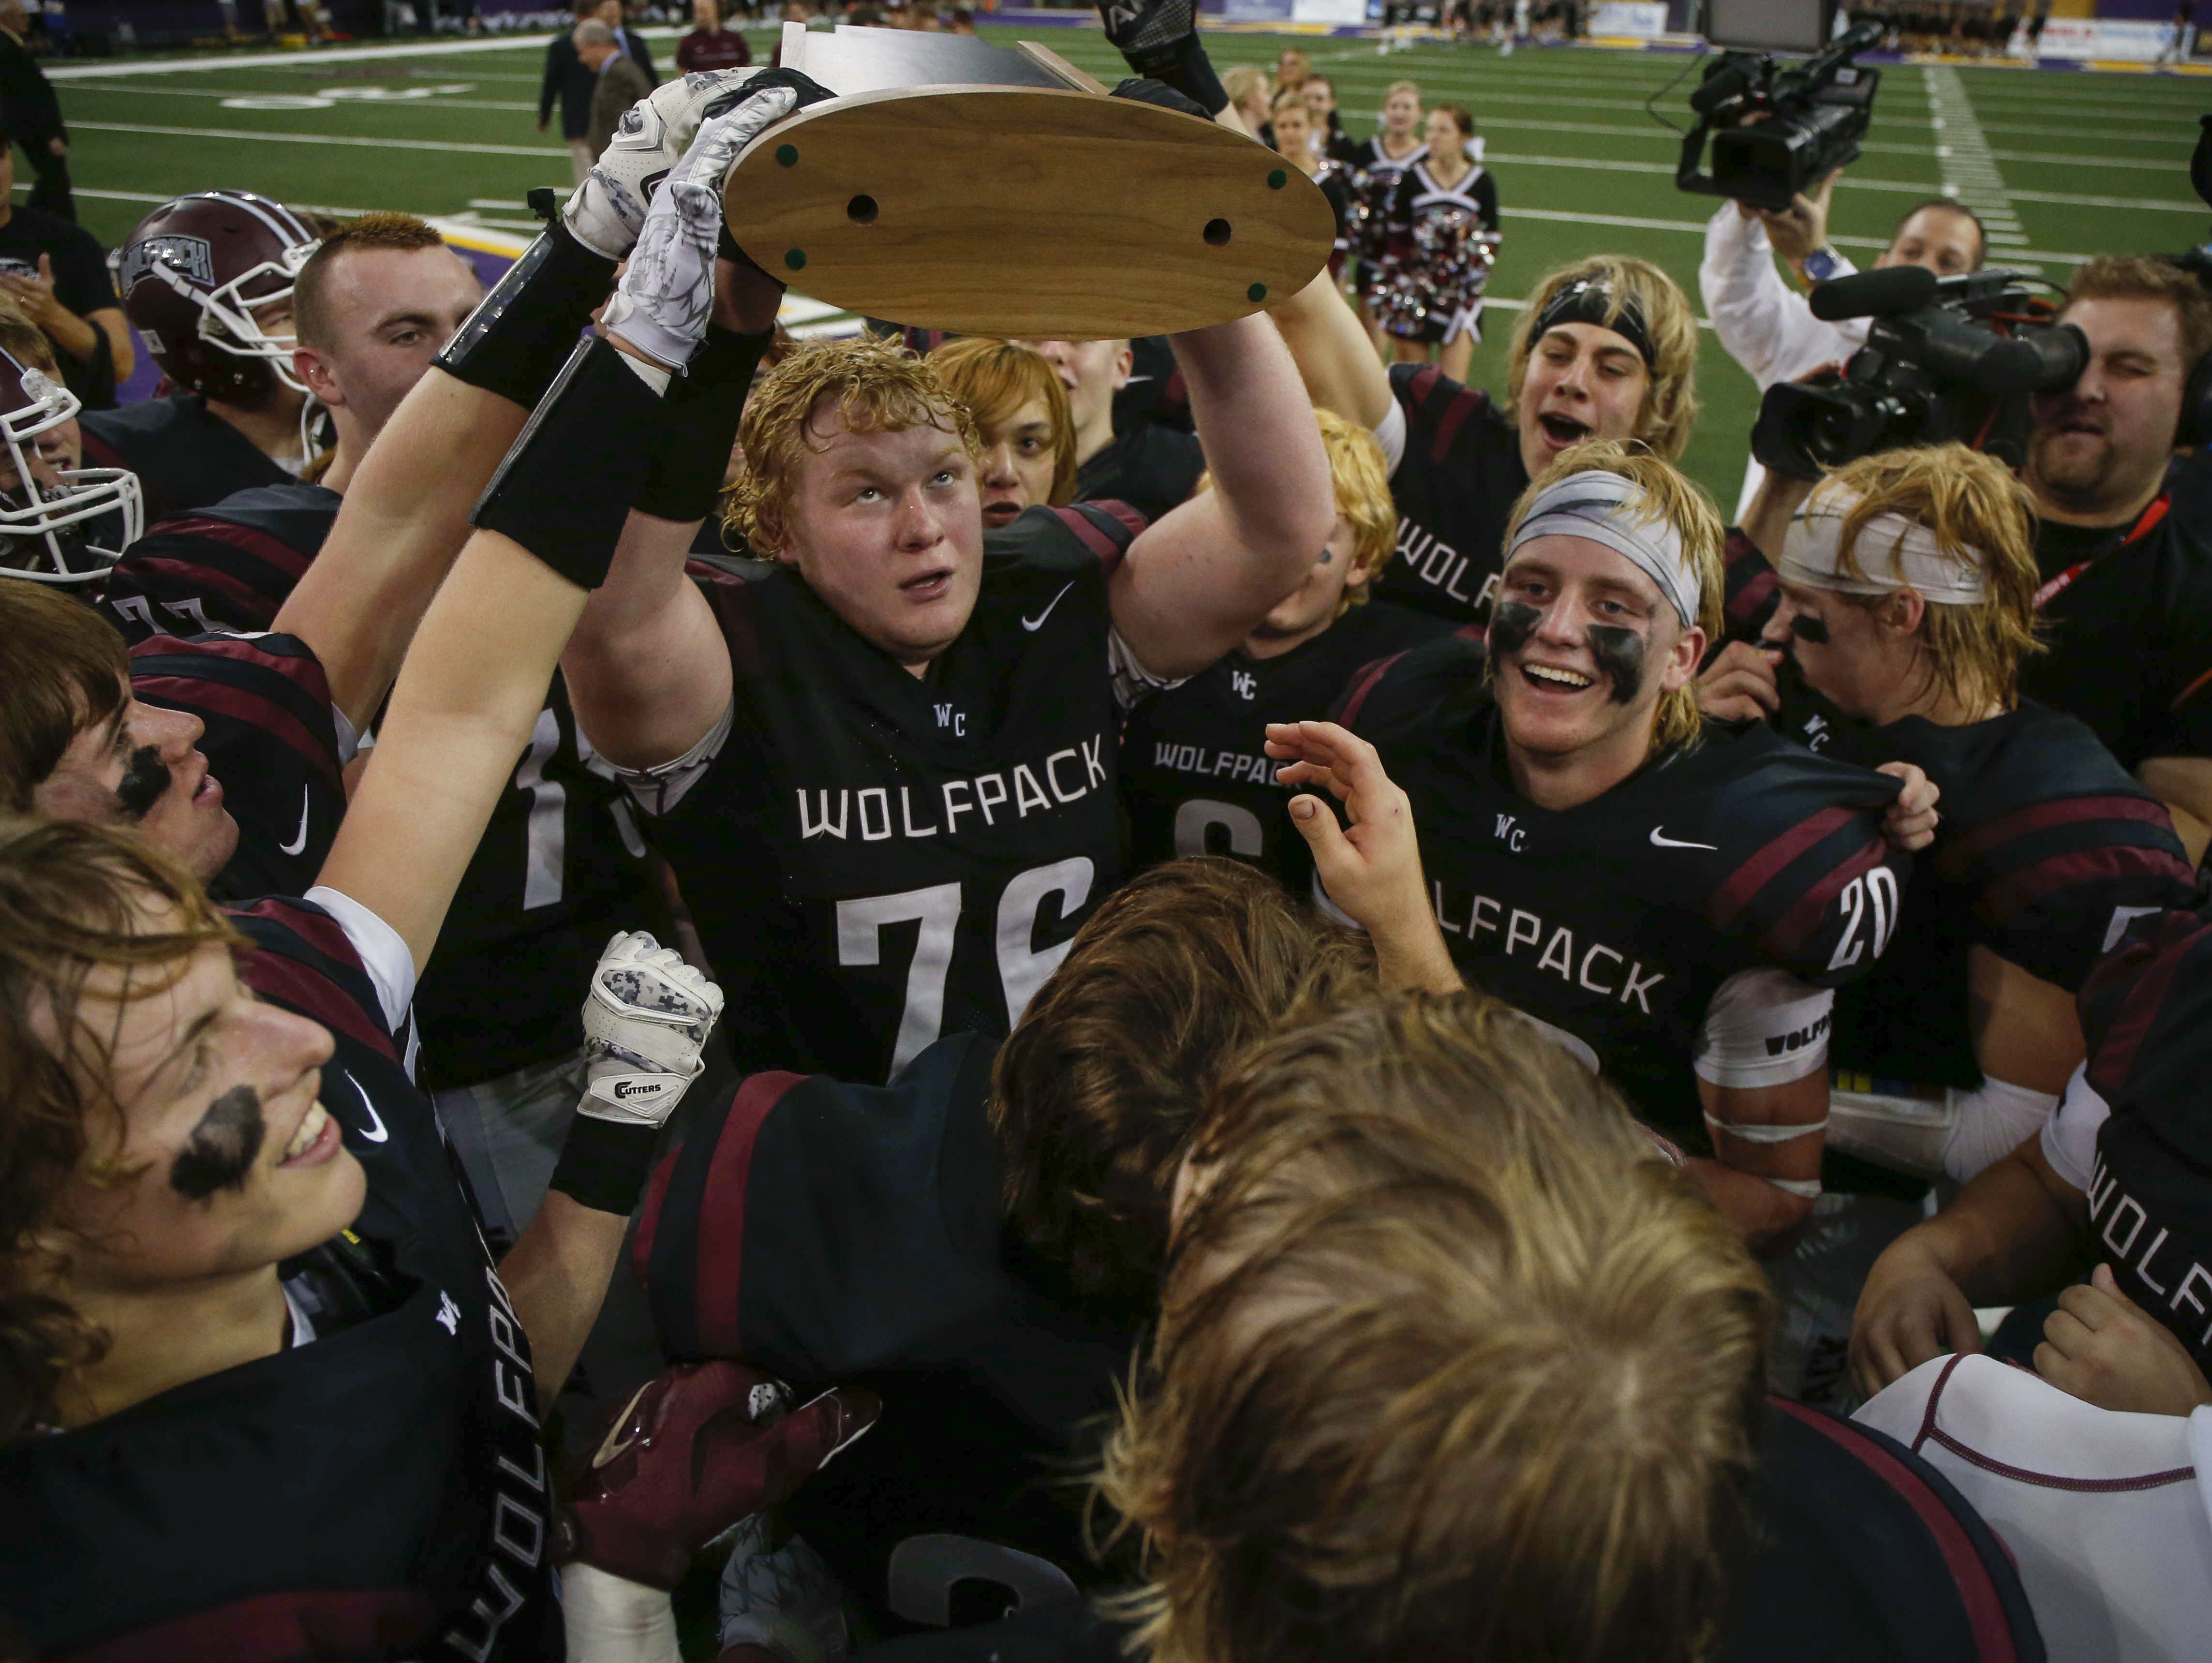 Members of the Western Christian football team celebrate a win over Iowa City Regina on Friday, Nov. 18, 2016, during the 2016 Iowa high school Iowa Class 1A football championships at the UNI-Dome in Cedar Falls.